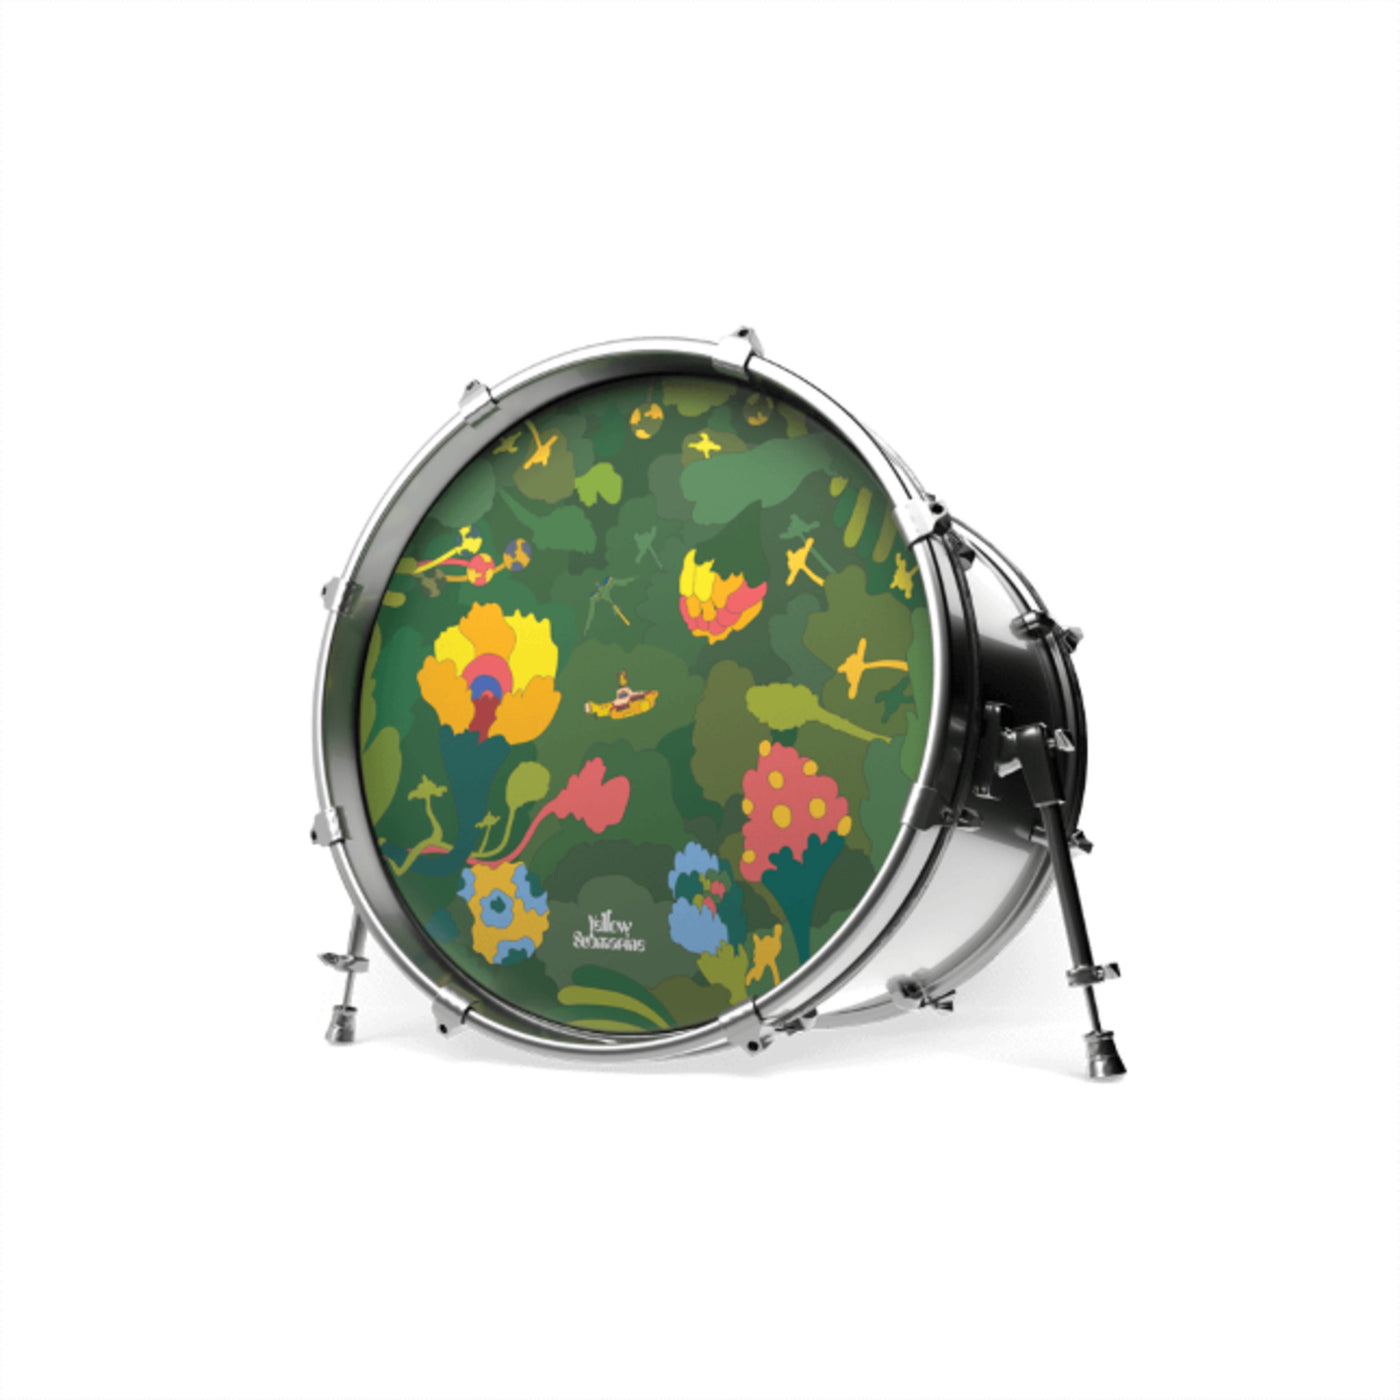 Evans INK20YELSUB-2 The Beatles Yellow Submarine Resonate Bass Drumhead for Drum Set, Pepperland Woods, 20 Inch